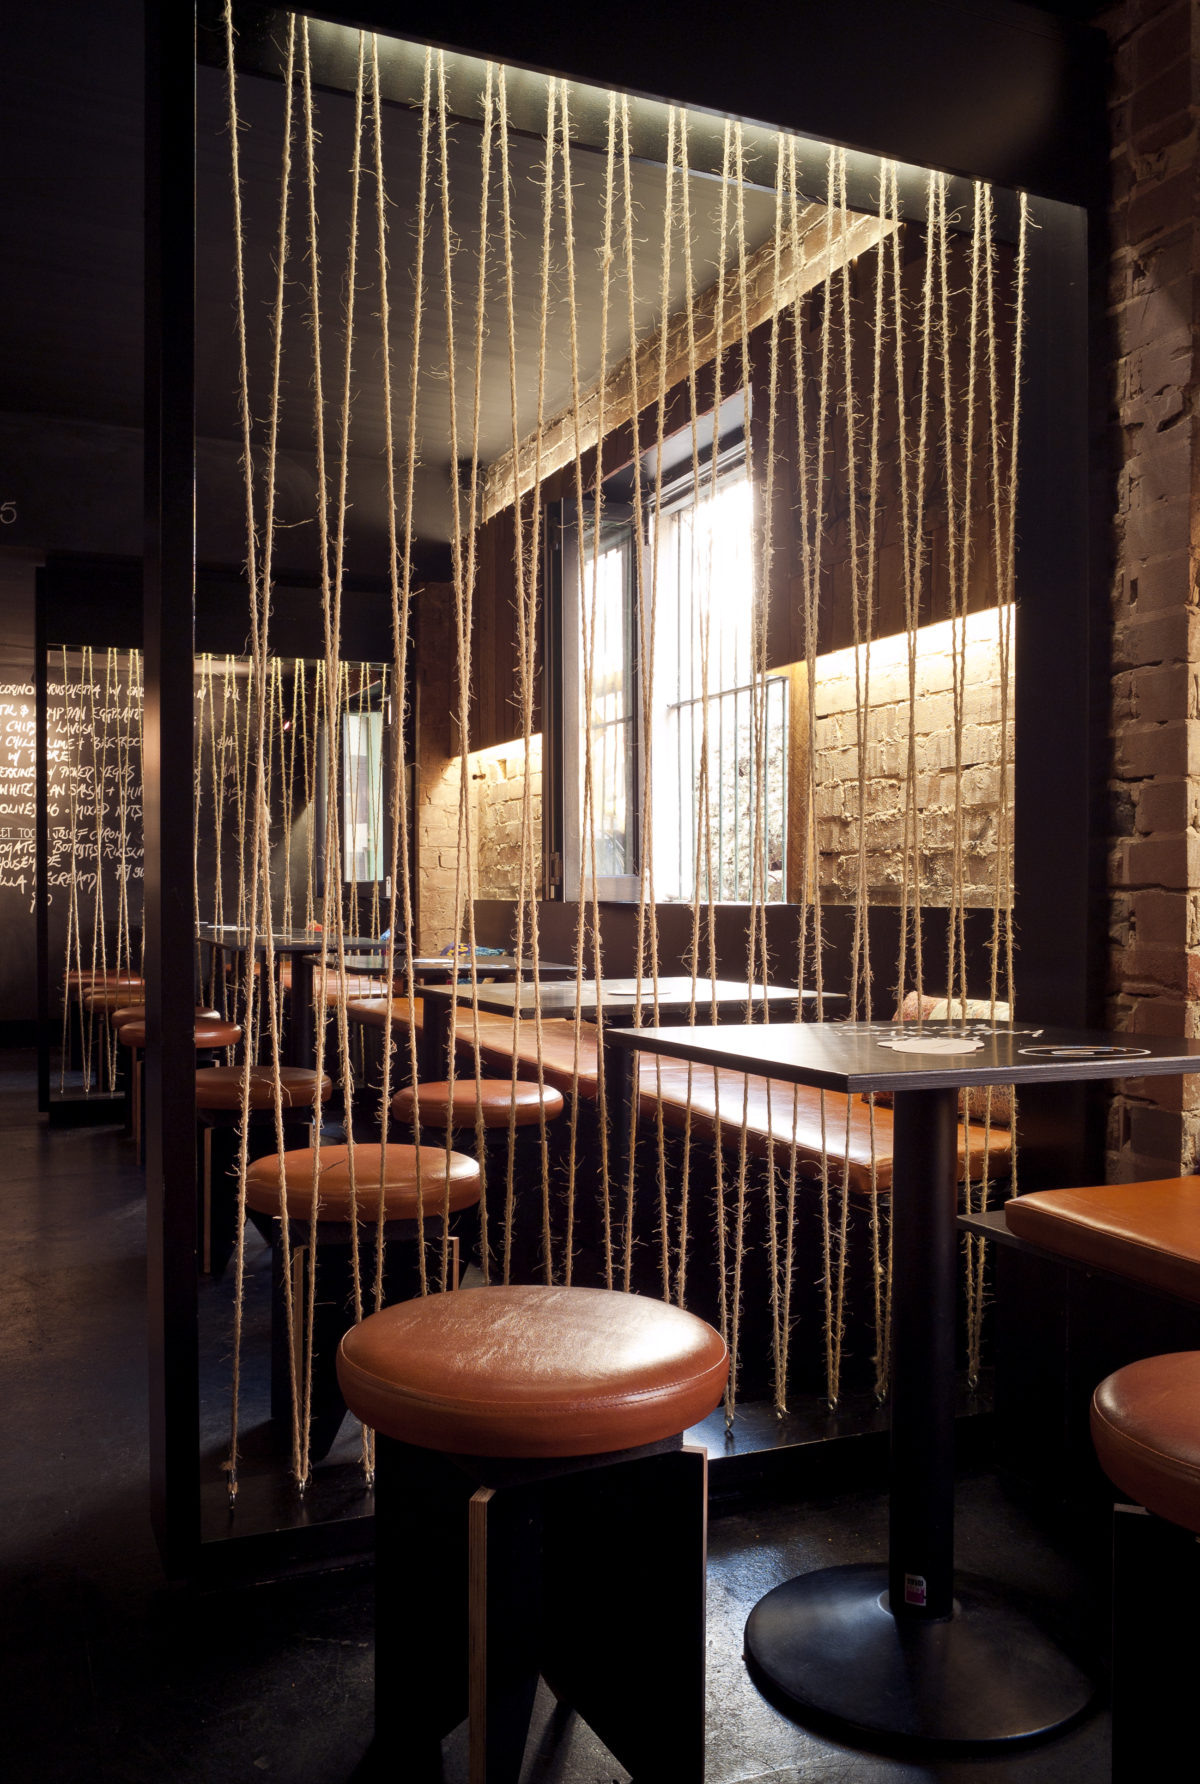 Timbah Glebe – a local wine bar with a small footprint; reorganised, reworked, reused and recycled. Image by Owen Zhu.